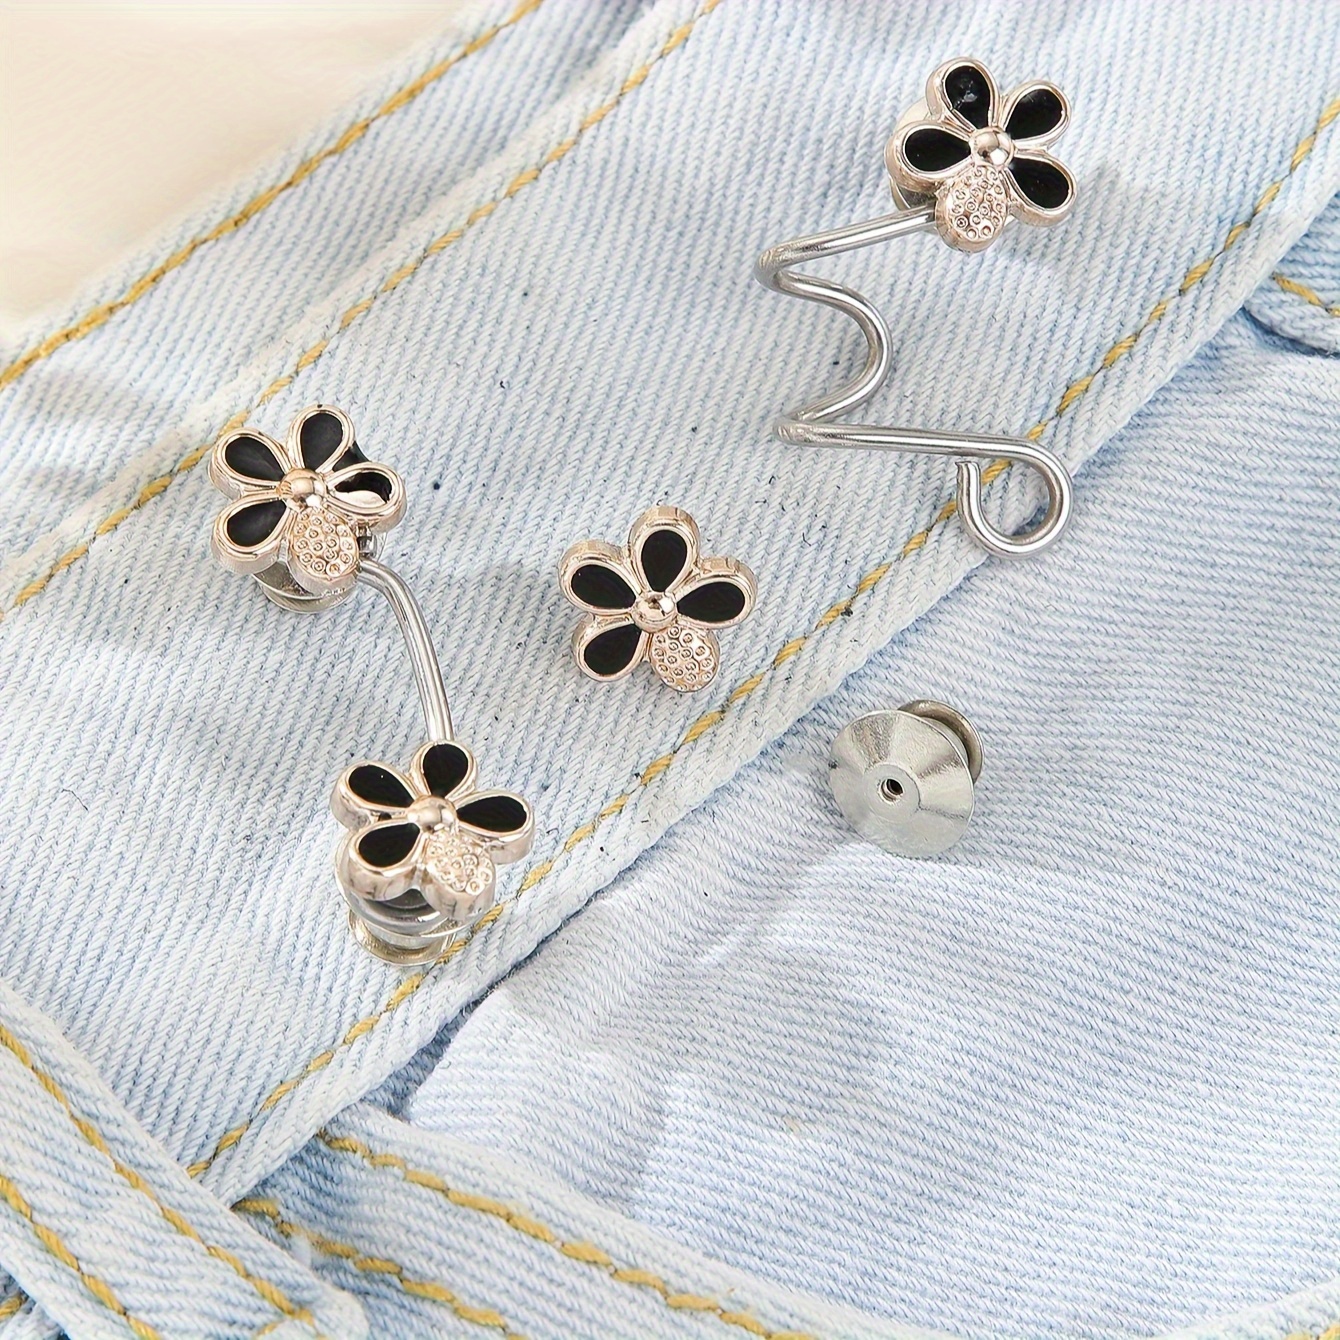 Faotup 8PCS Daisy and Butterfly's Pant Clips for Waist Tightener